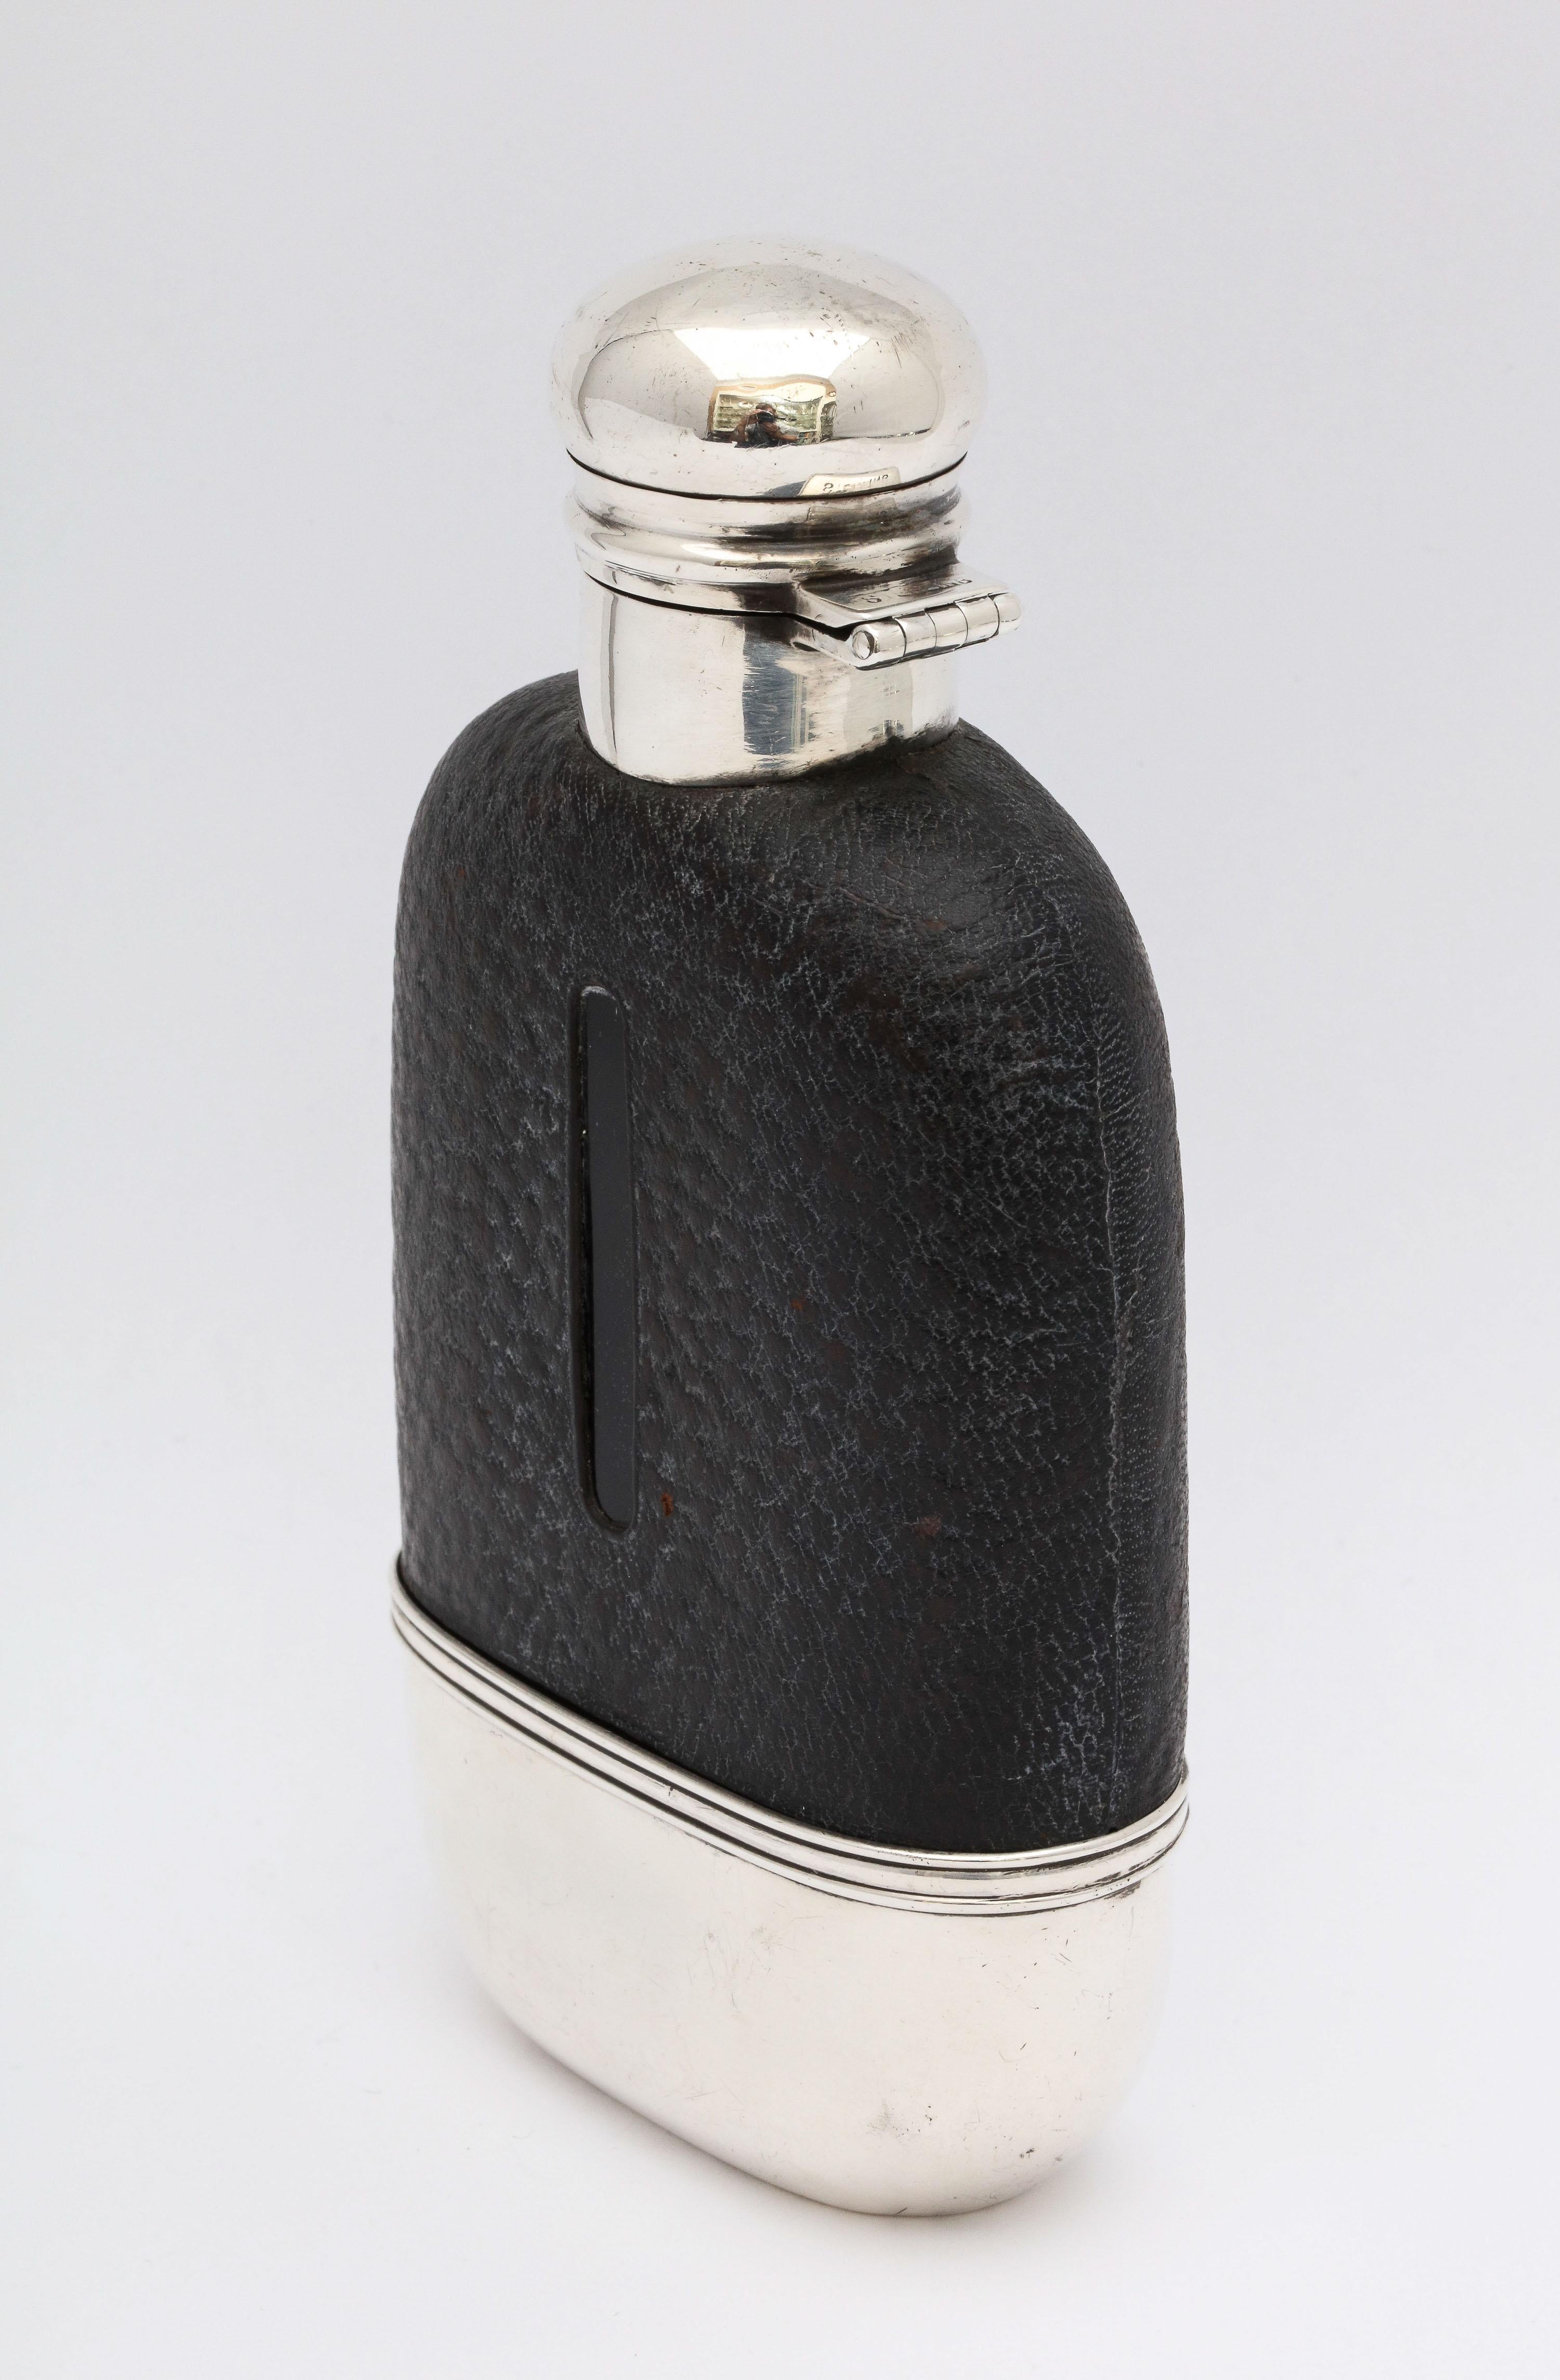 Gilt Edwardian Period Sterling Silver and Leather, Mounted Glass Flask